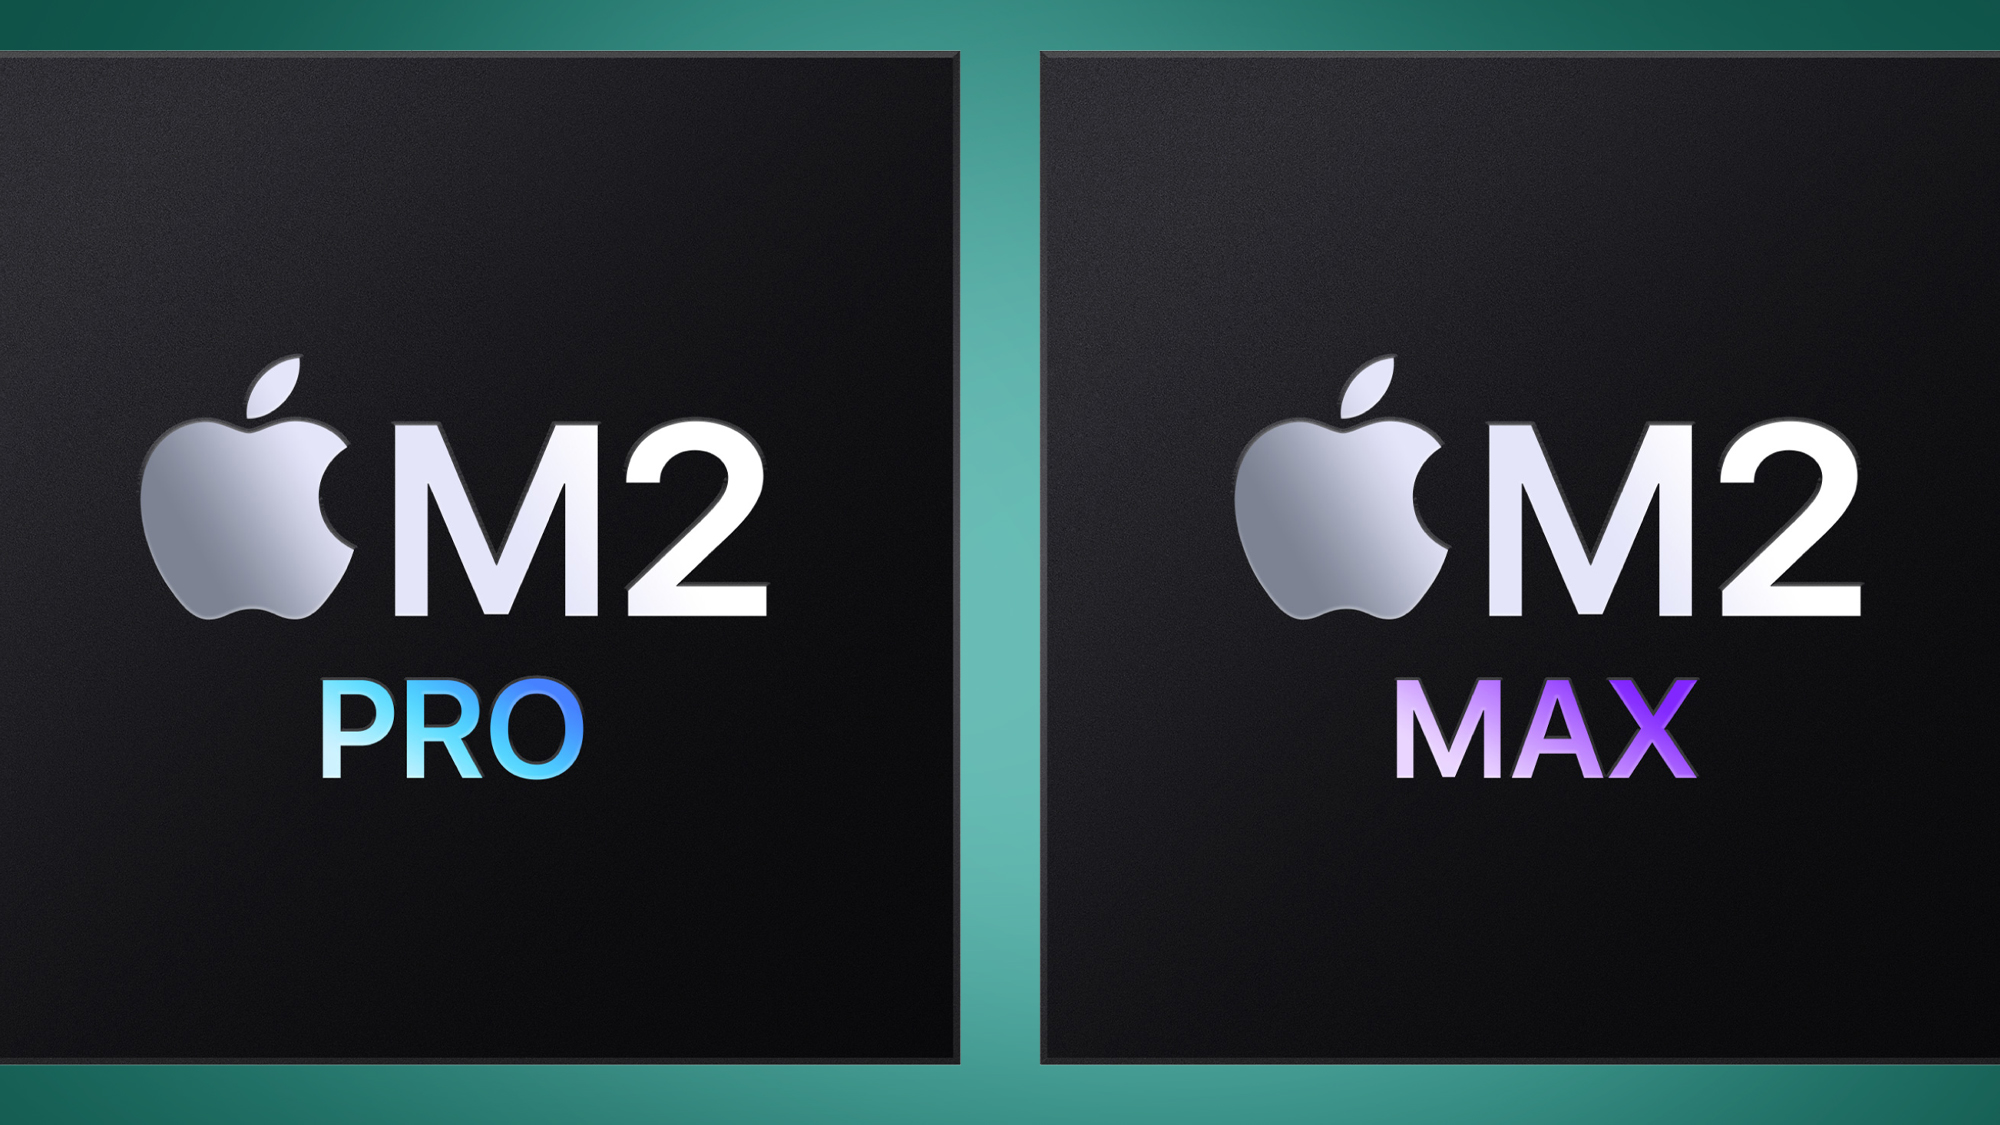 The Apple M2 Pro and M2 Max chips on a green background